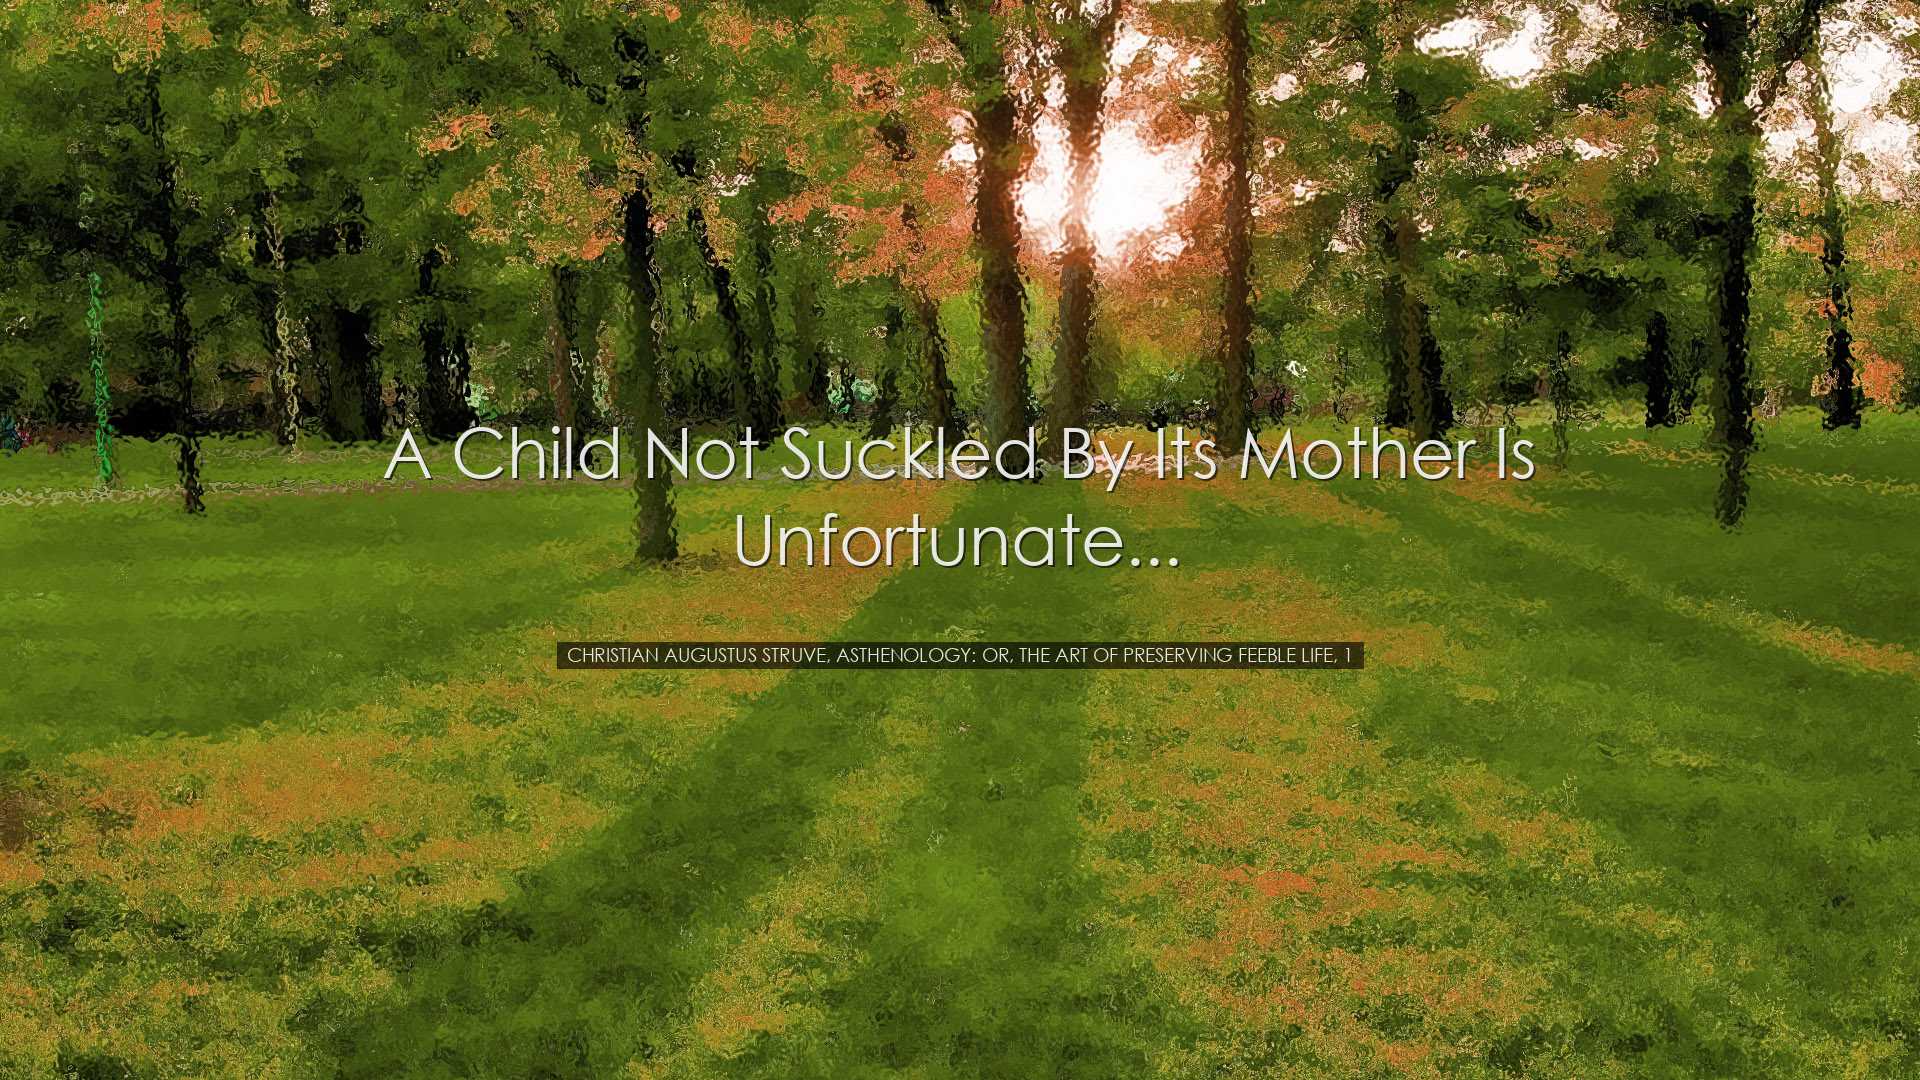 A child not suckled by its mother is unfortunate... - Christian Au